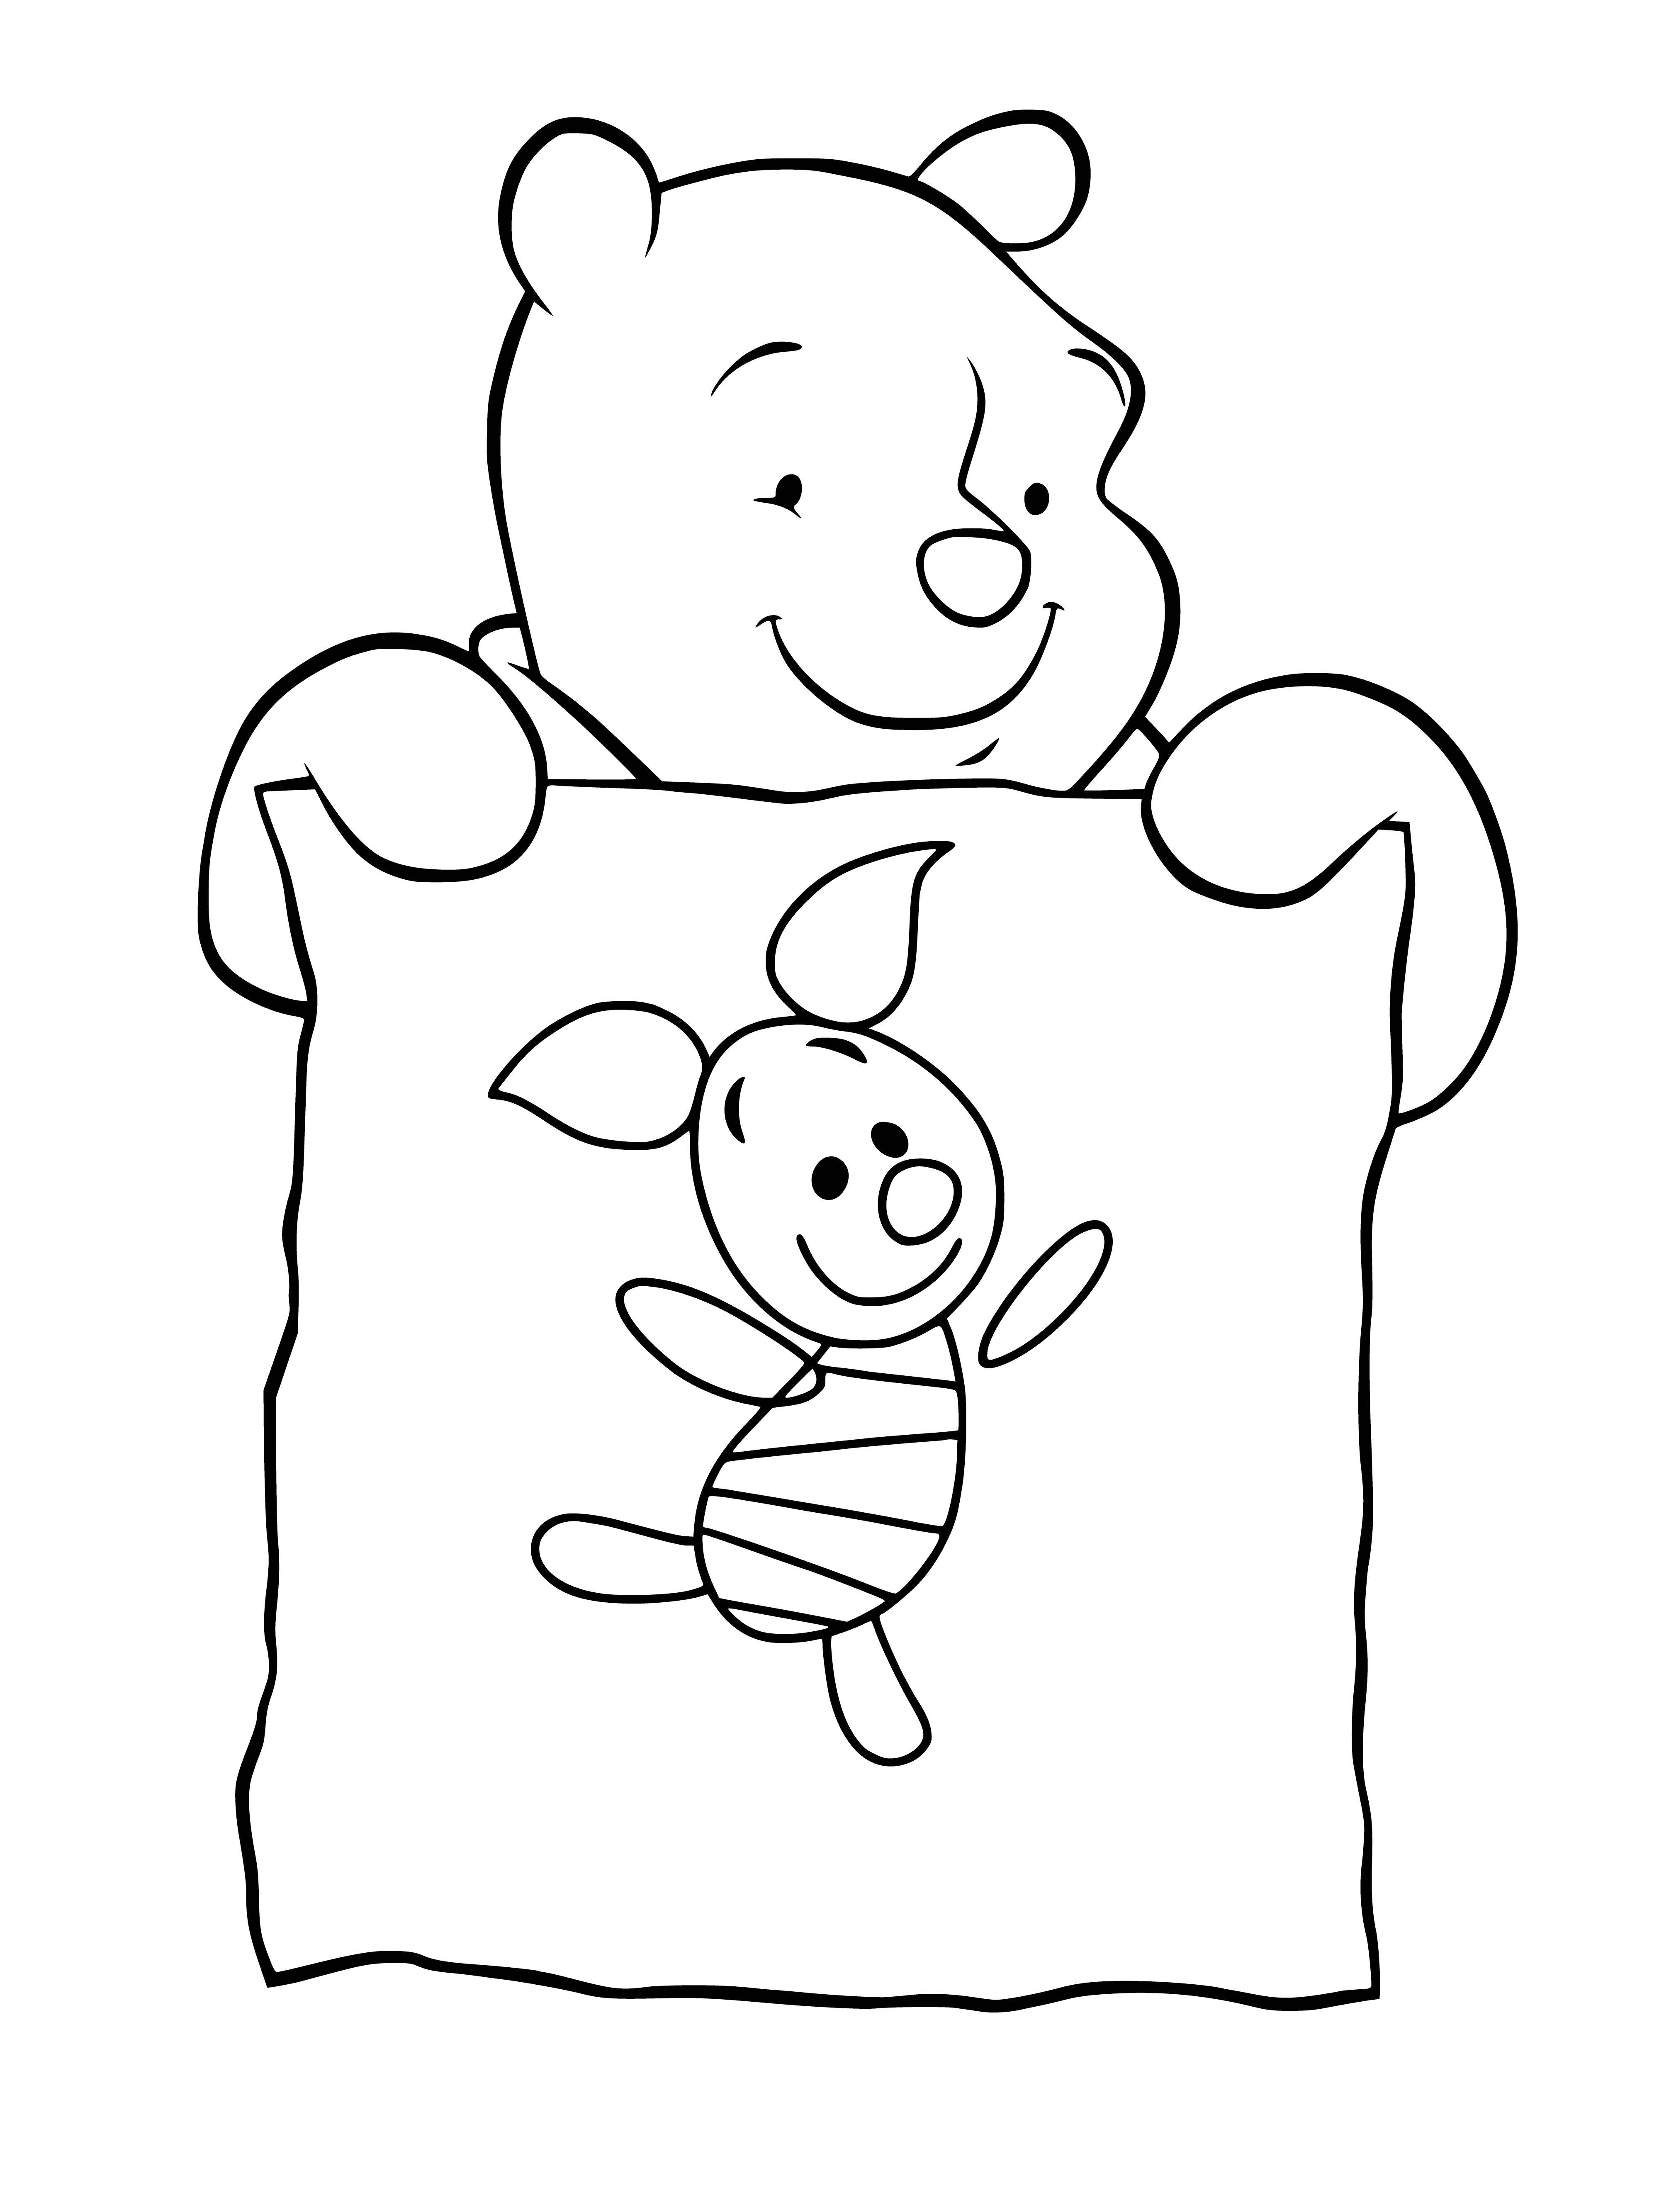 Khruni's drawing coloring page